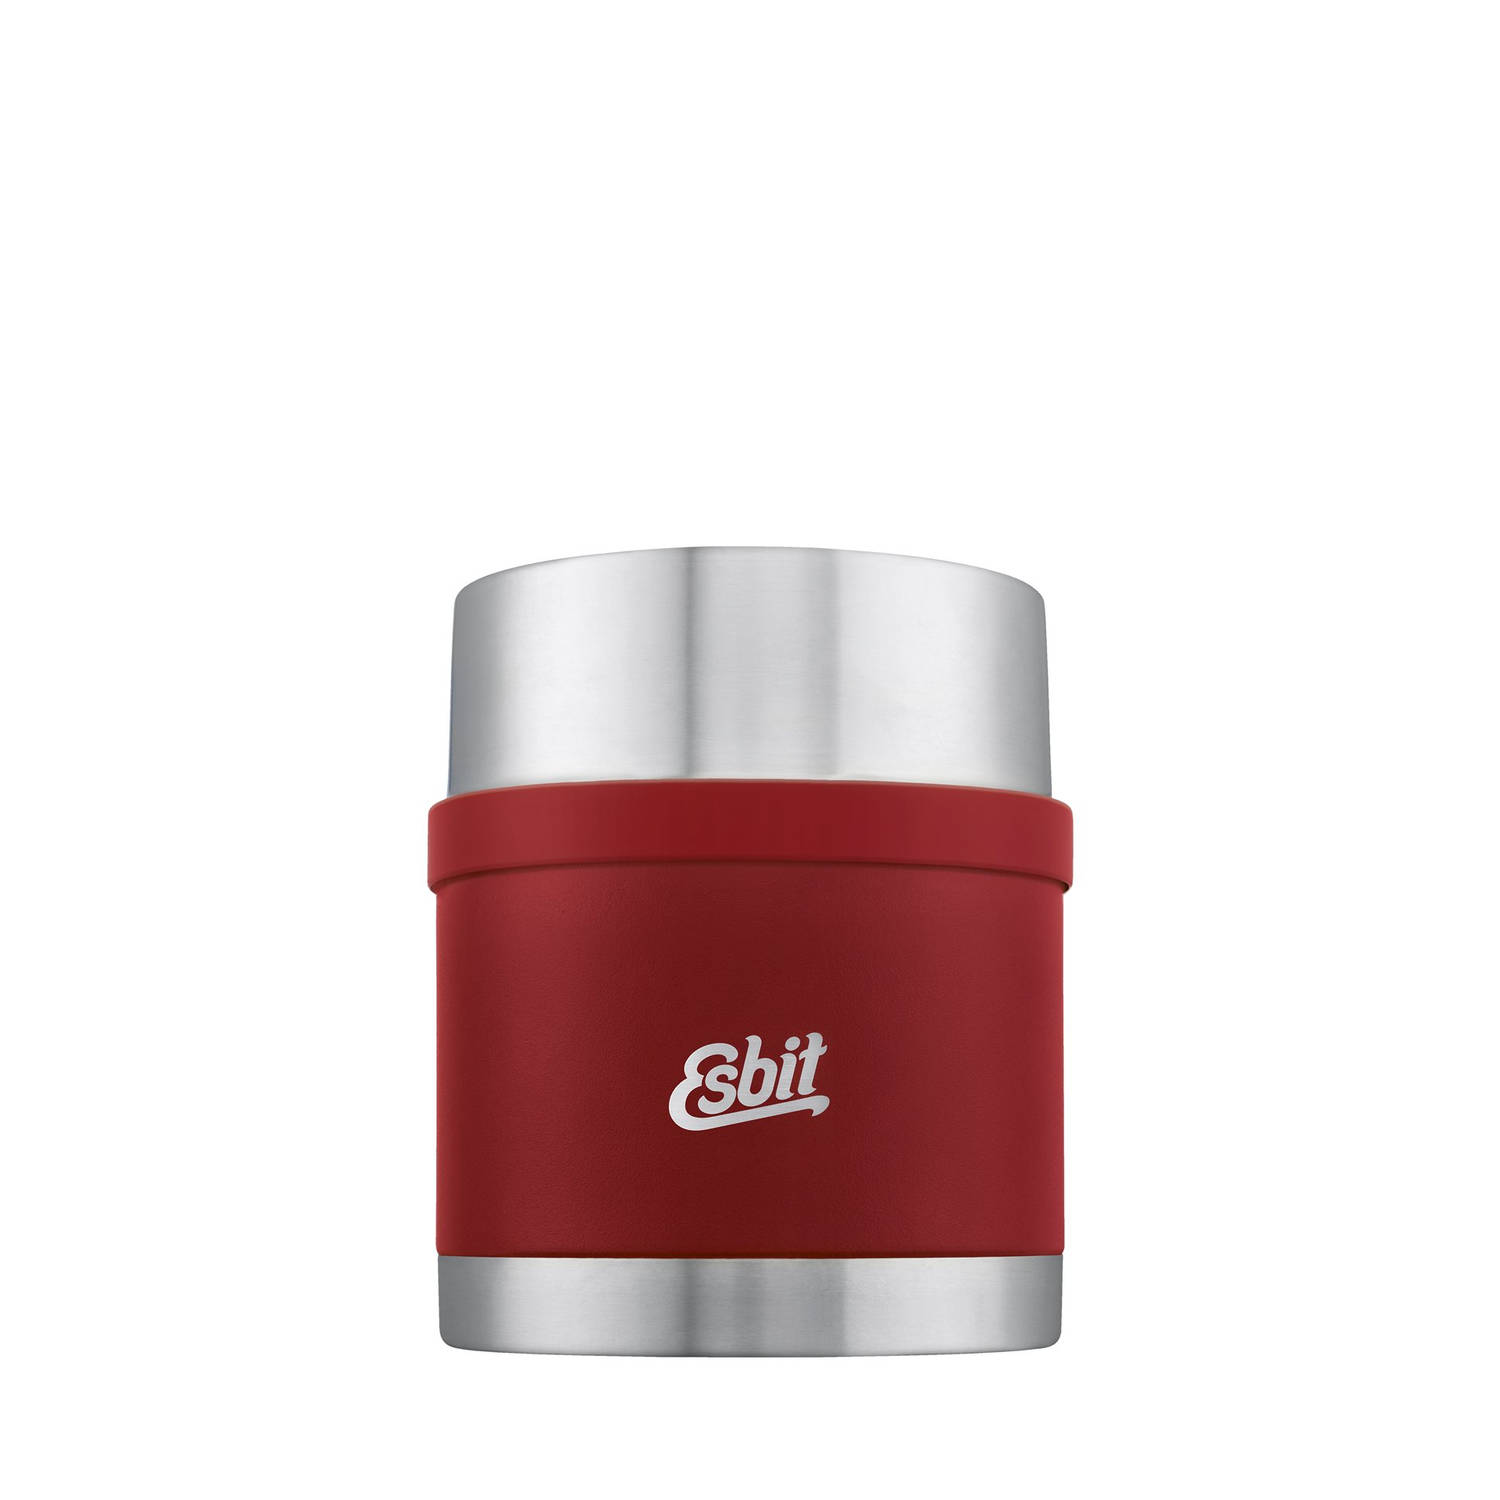 Esbit Sculptor Thermos Voedselcontainer - 500 ml - RVS - Bordeaux Rood